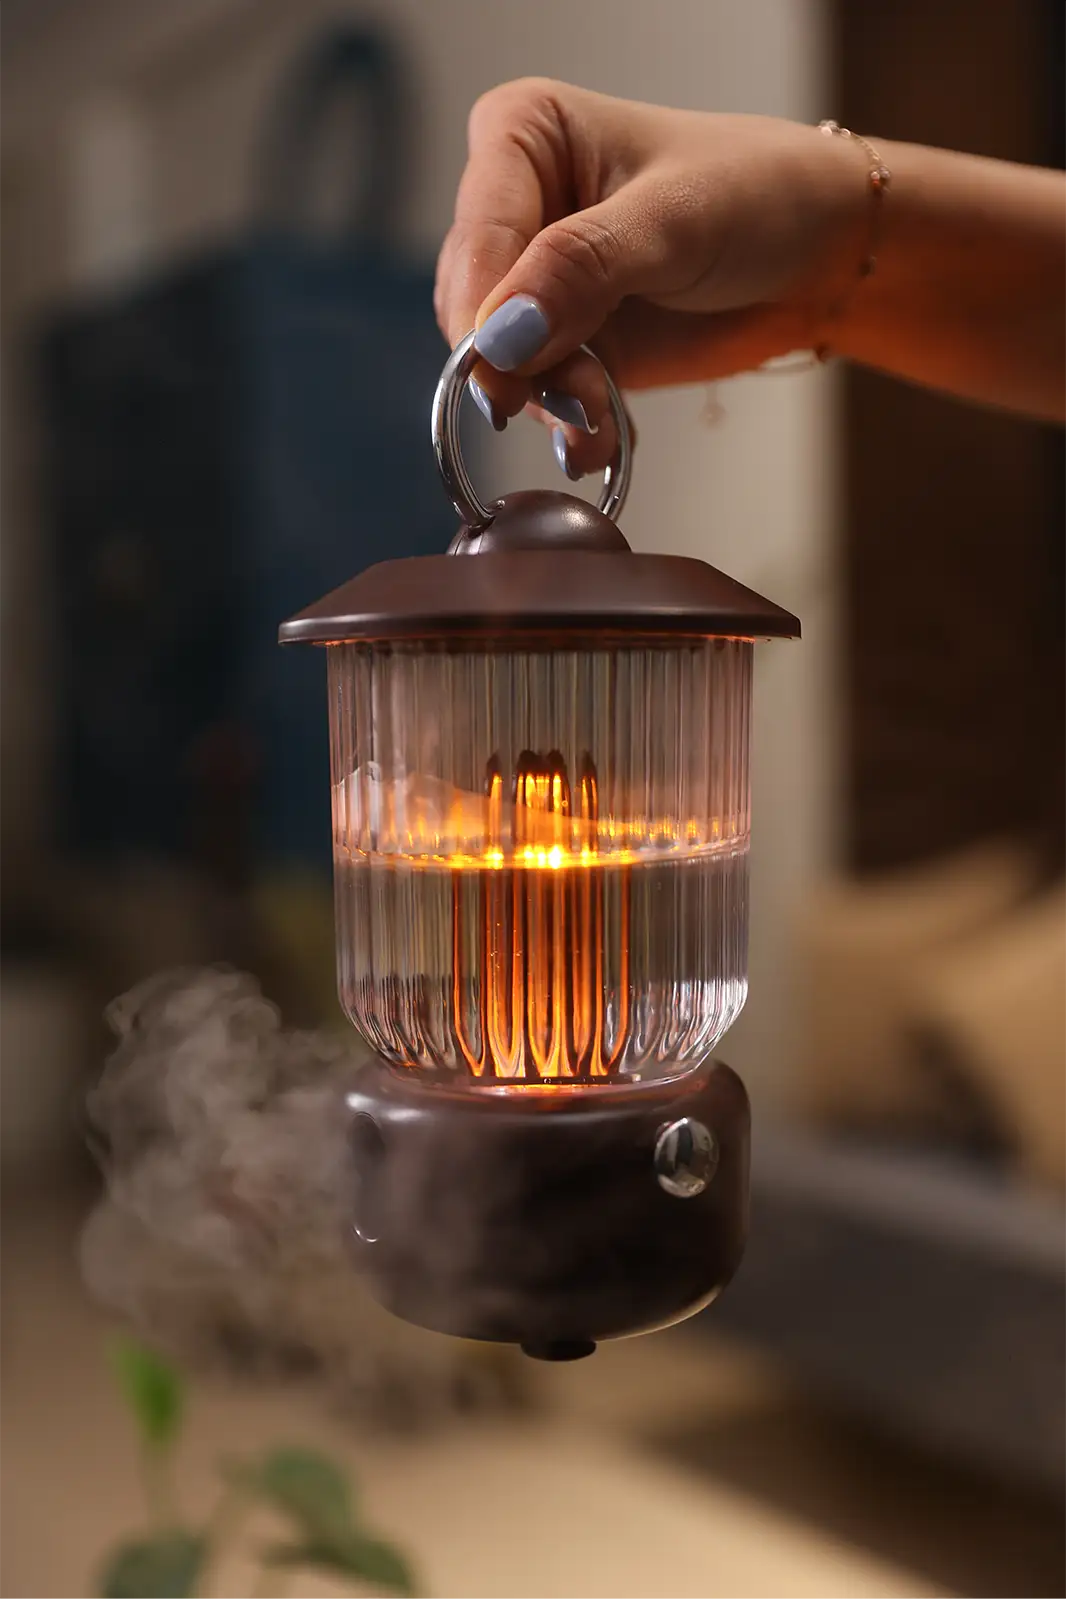 Aroma lamp diffuser, aromatic lamp diffuser, aroma diffuser machine, essential oil lamp diffuser, electric diffuser, aroma diffuser for home, fragrance for home, aromatic products, aromatherapy, diffuser for room, electric aroma diffuser for home, home diffuser, electric fragrance diffuser, diffuser for bathroom